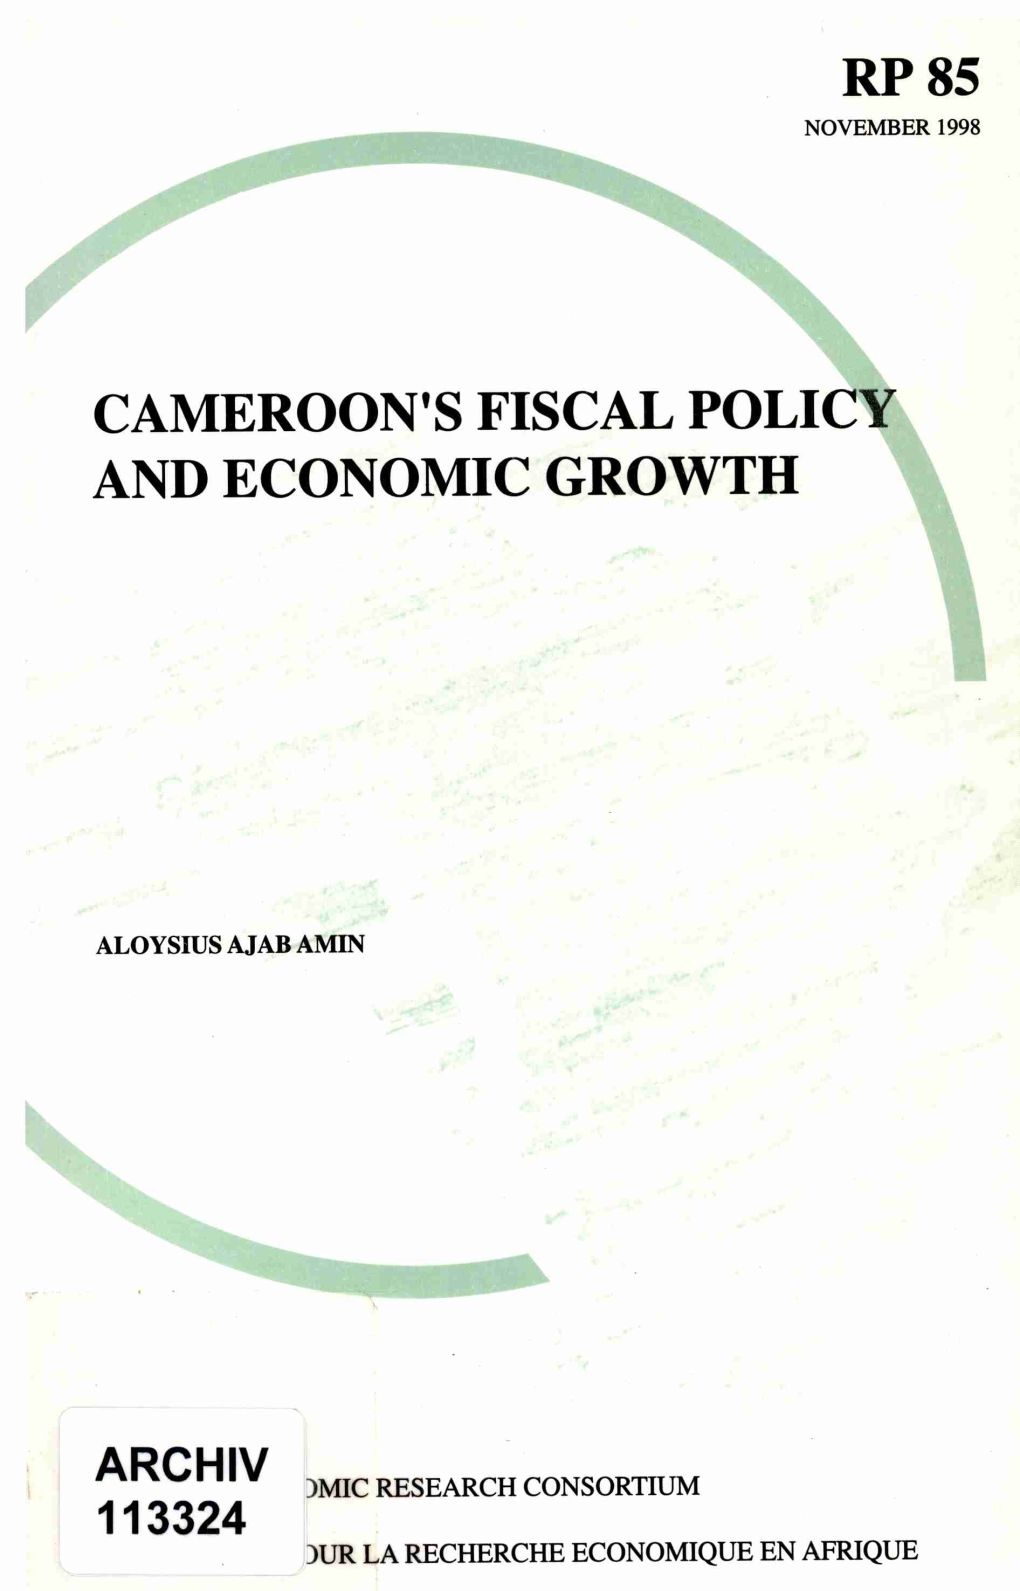 Cameroon's Fiscal Policy and Economic Growth